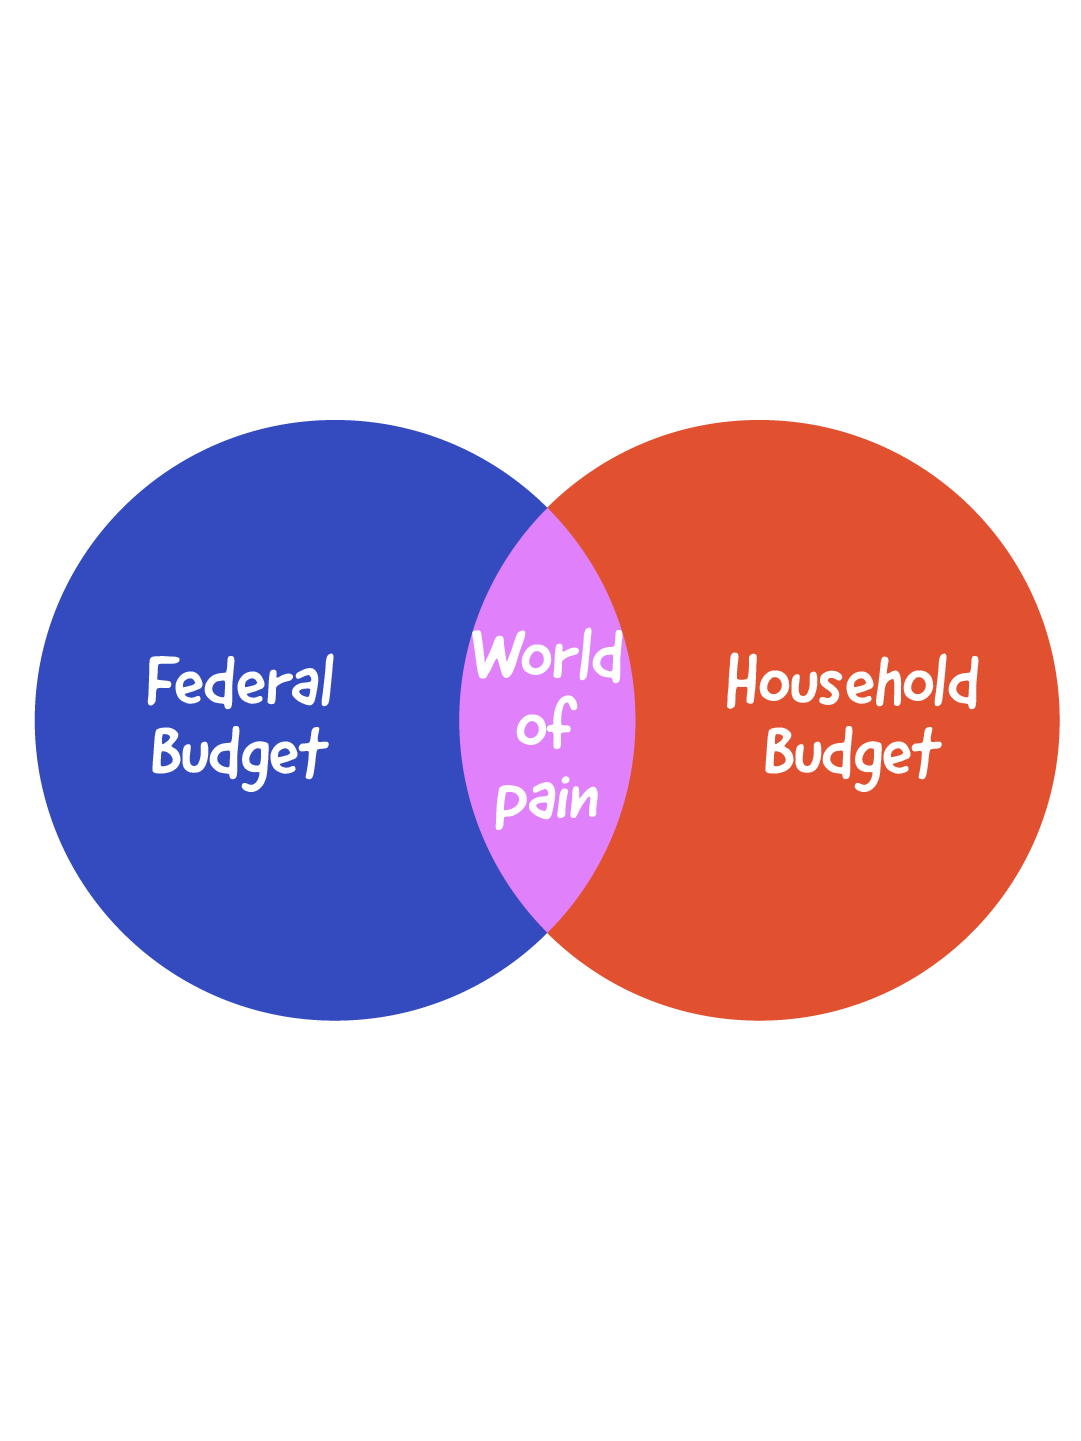 A venn diagram with federal budget and household budget overlapping in a world of pain